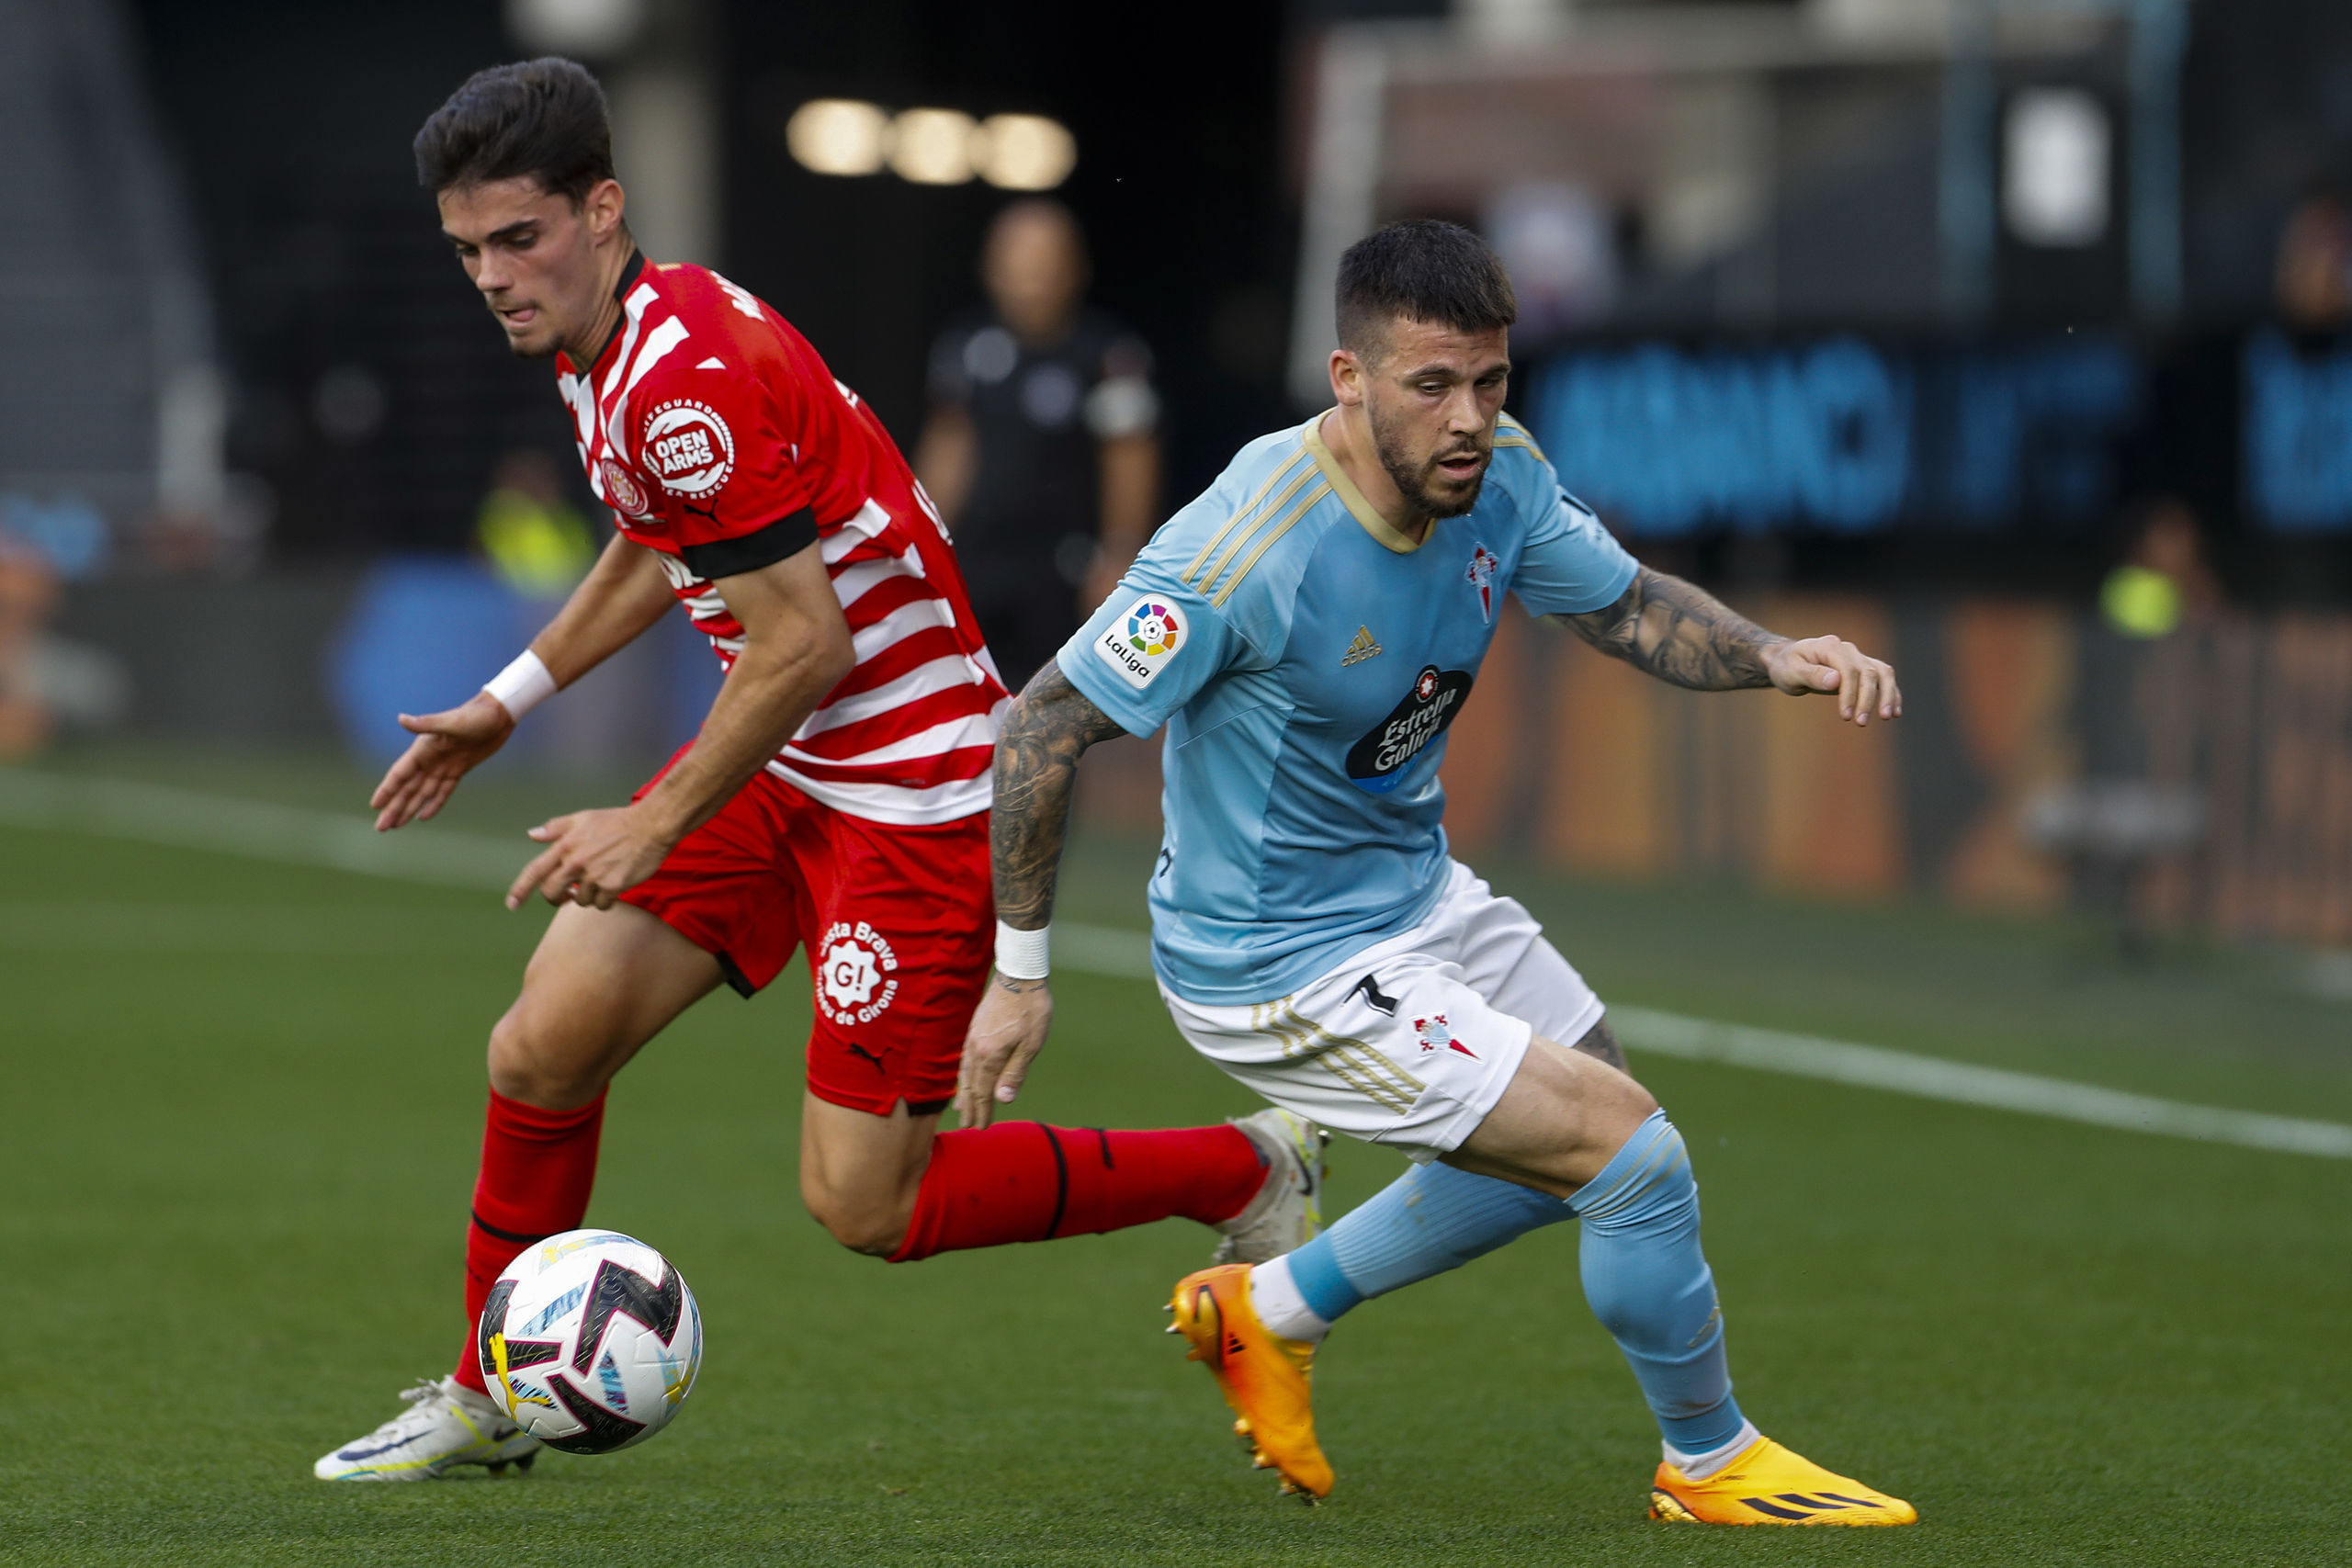 Celta achieves a golden point and Real ties the Champions League